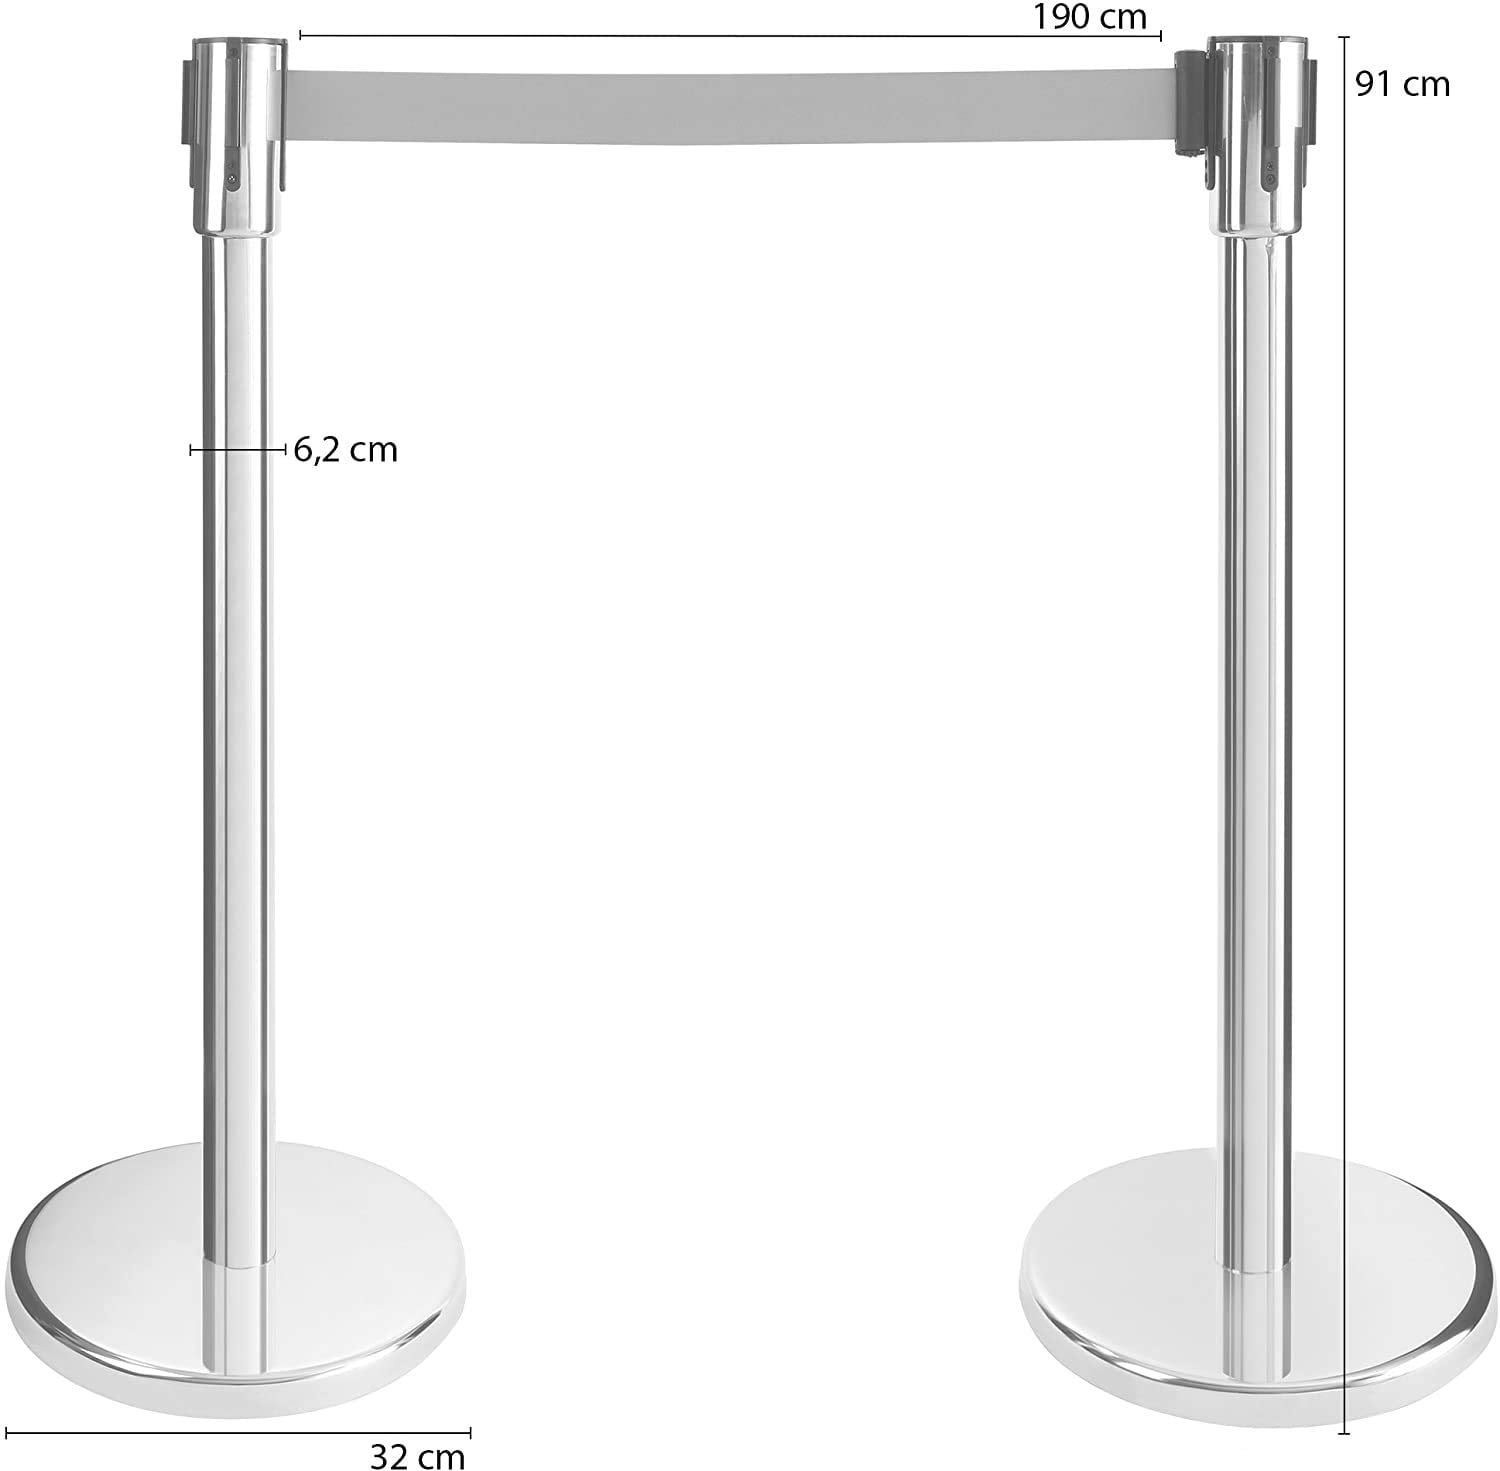 QUEUE MANAGER(Set of 2 Pcs) Stanchion Anti-Rust Not Easily Deformed Heavy Duty , Premium Steel Post Crowd Control Barrier with Retractable Belt